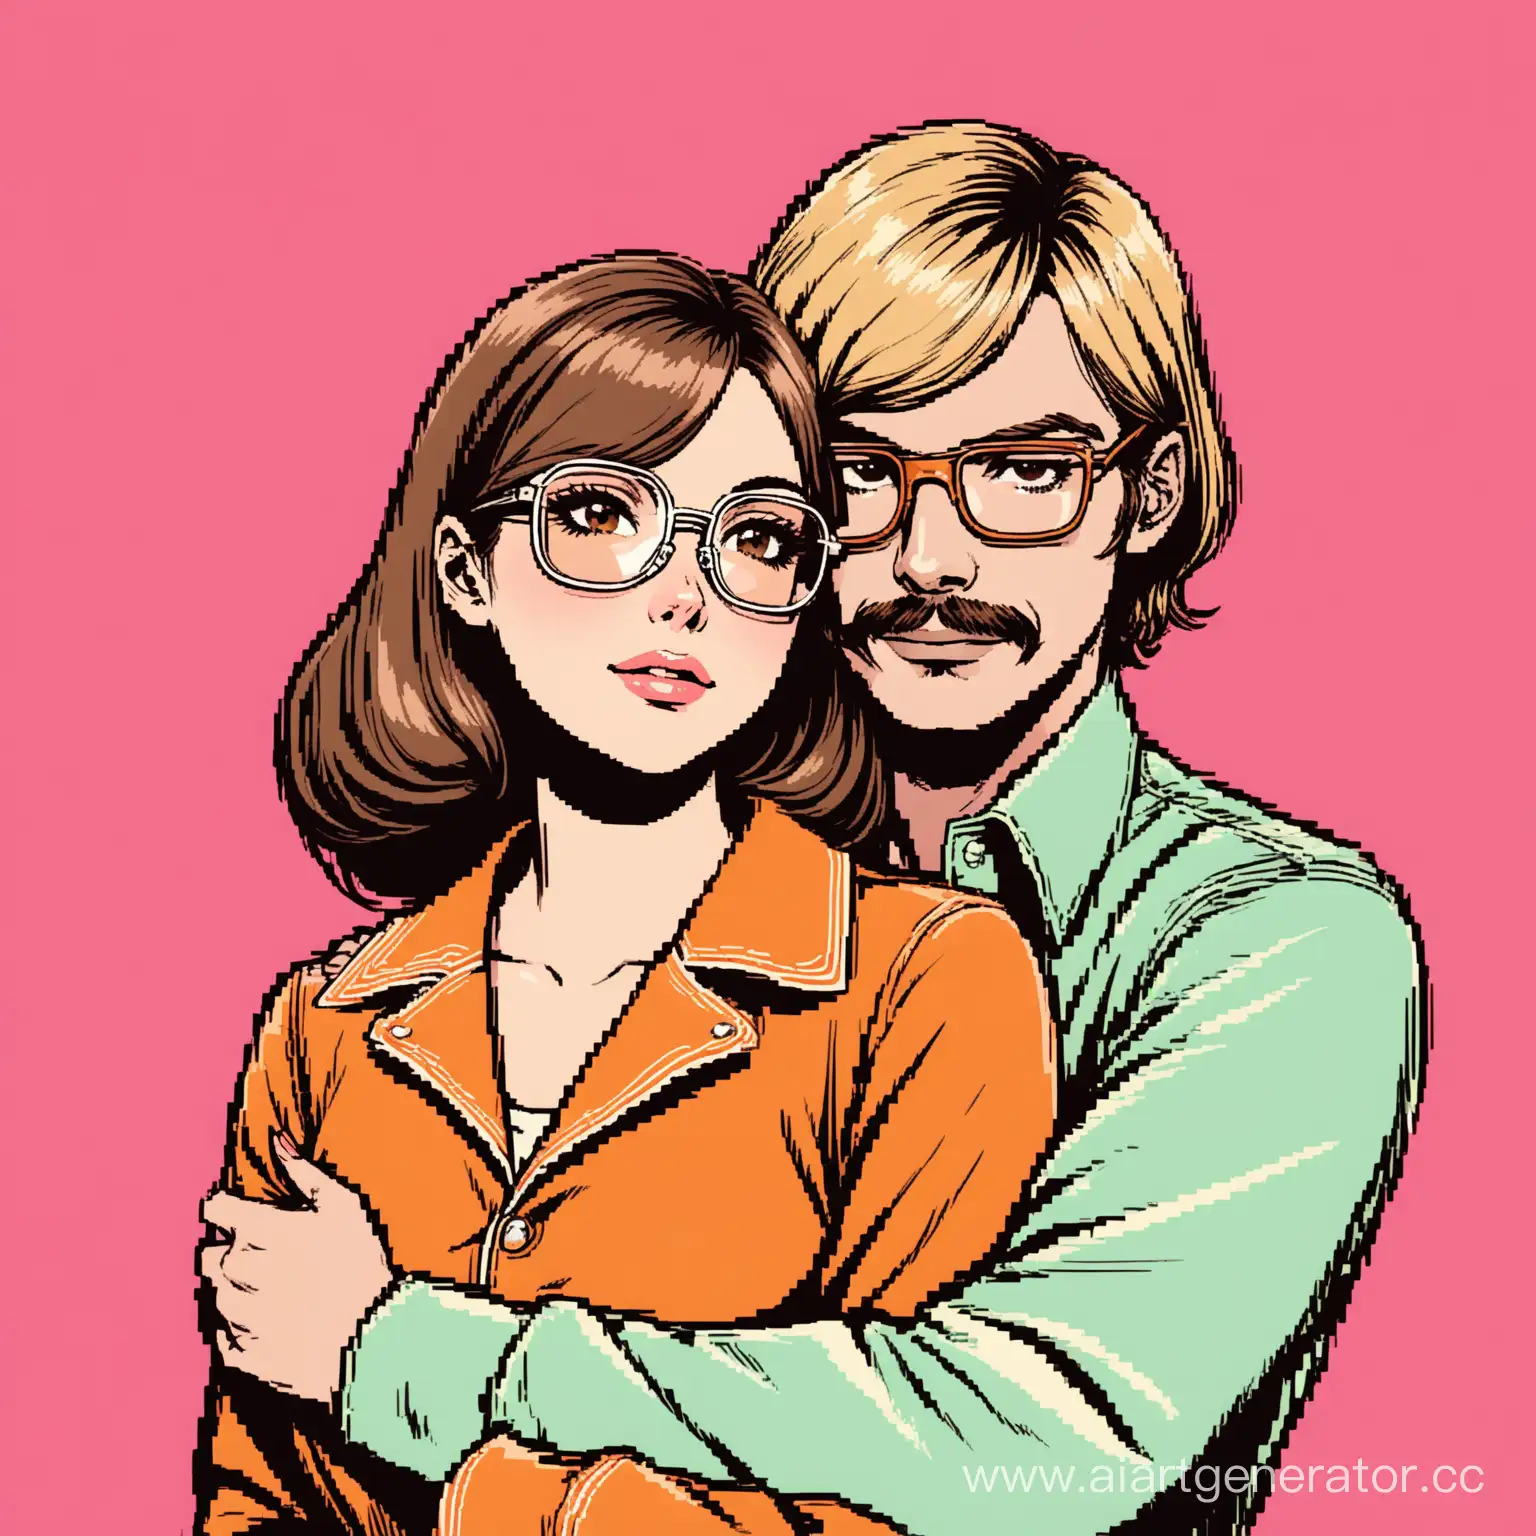 Young-Woman-Embracing-Blond-Man-in-Retro-Aviator-Glasses-on-Pink-Background